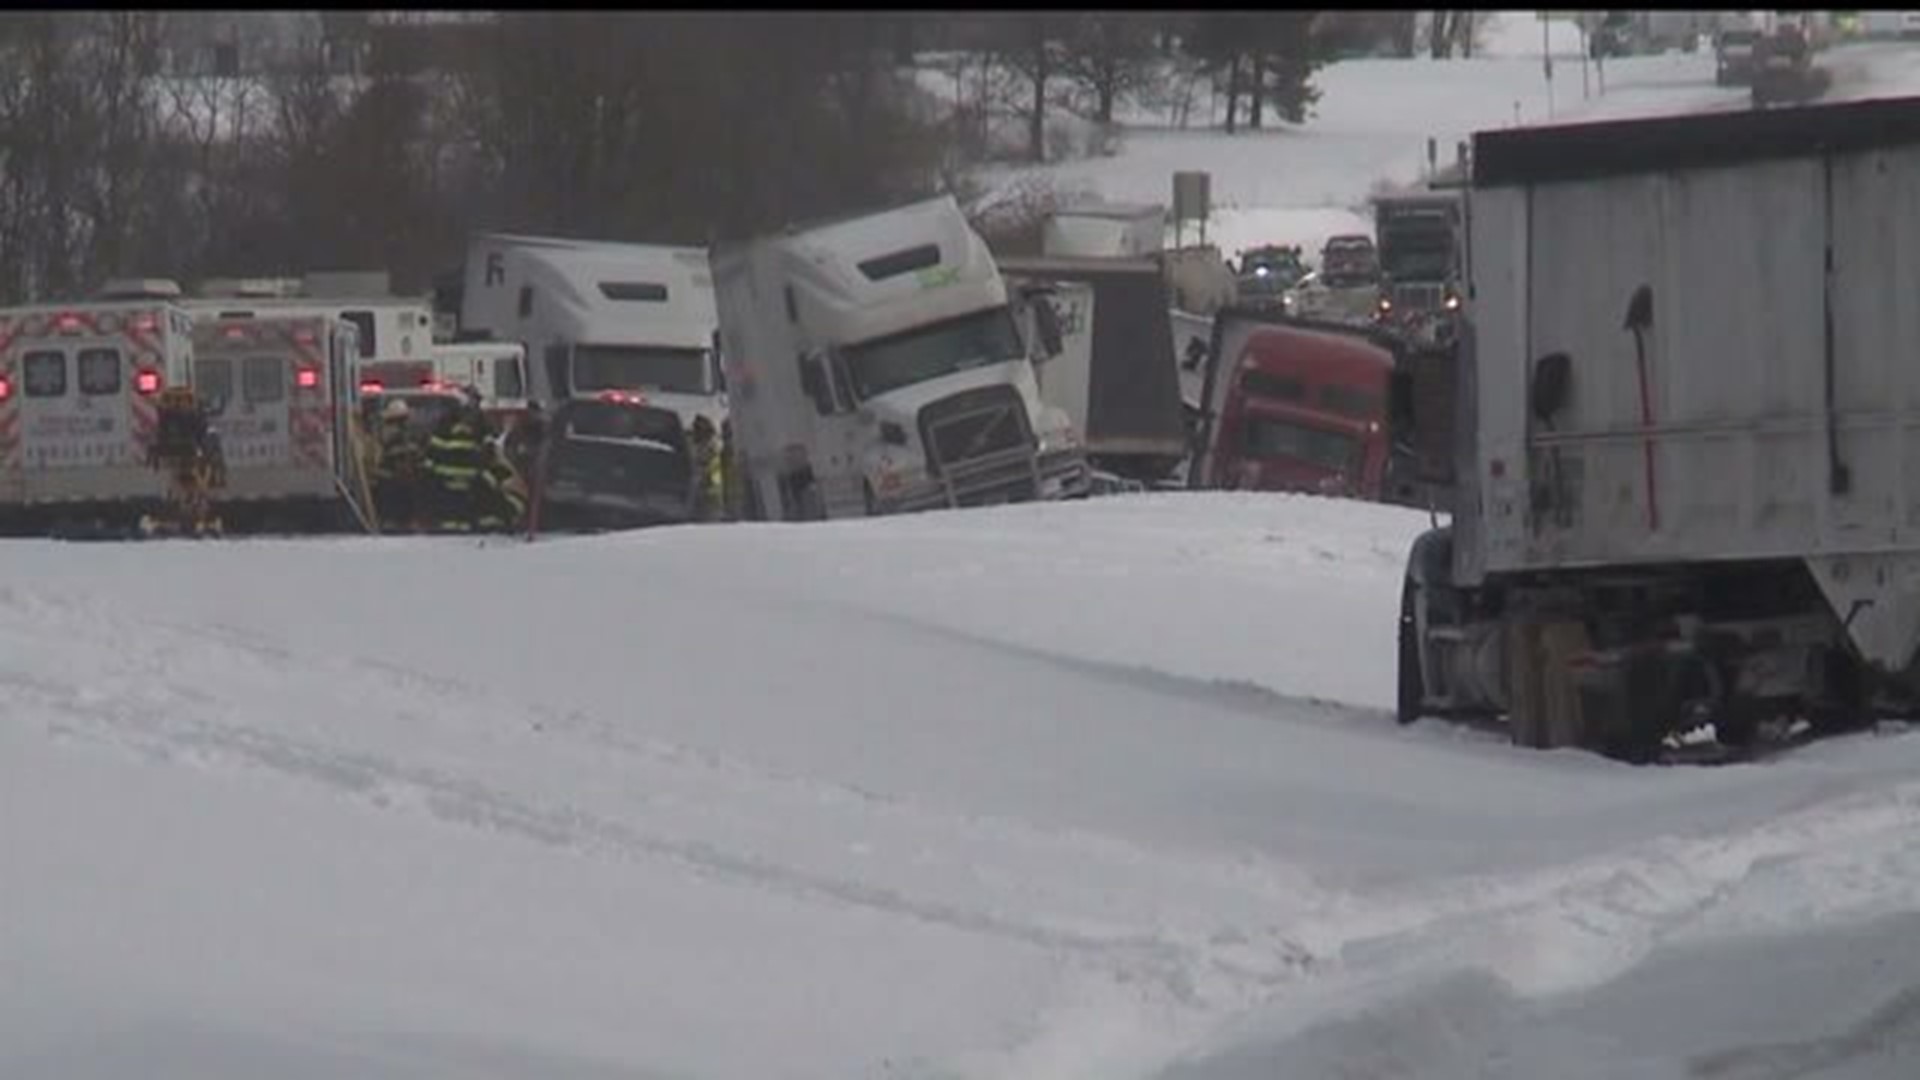 At least 3 are dead following Interstate 78 pileup